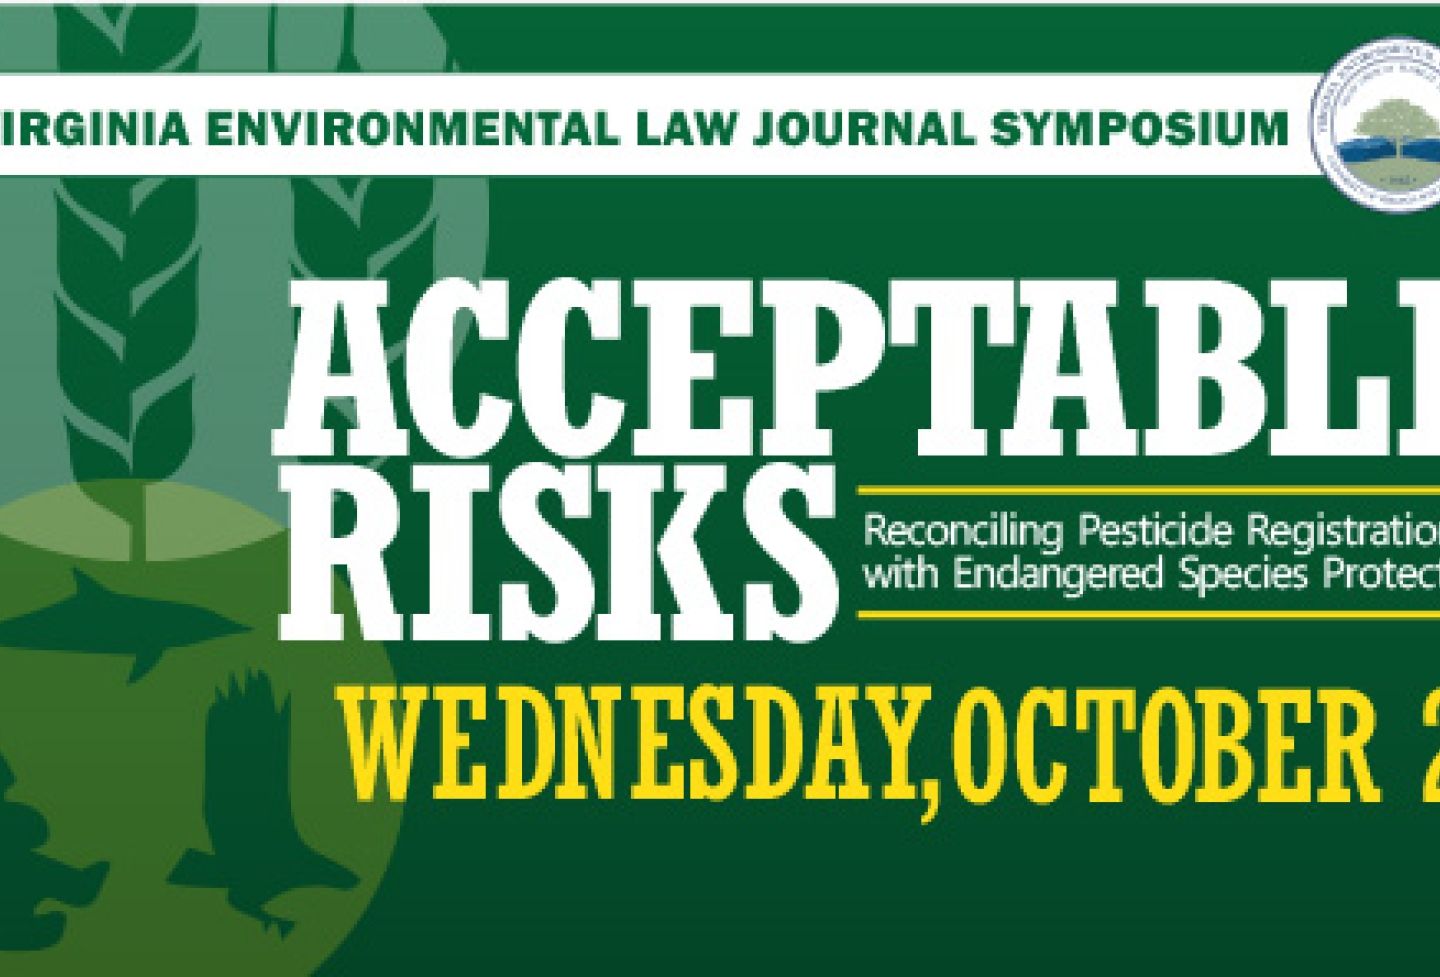 Acceptable Risks: Reconciling Pesticide Registration with Endangered Species Protection